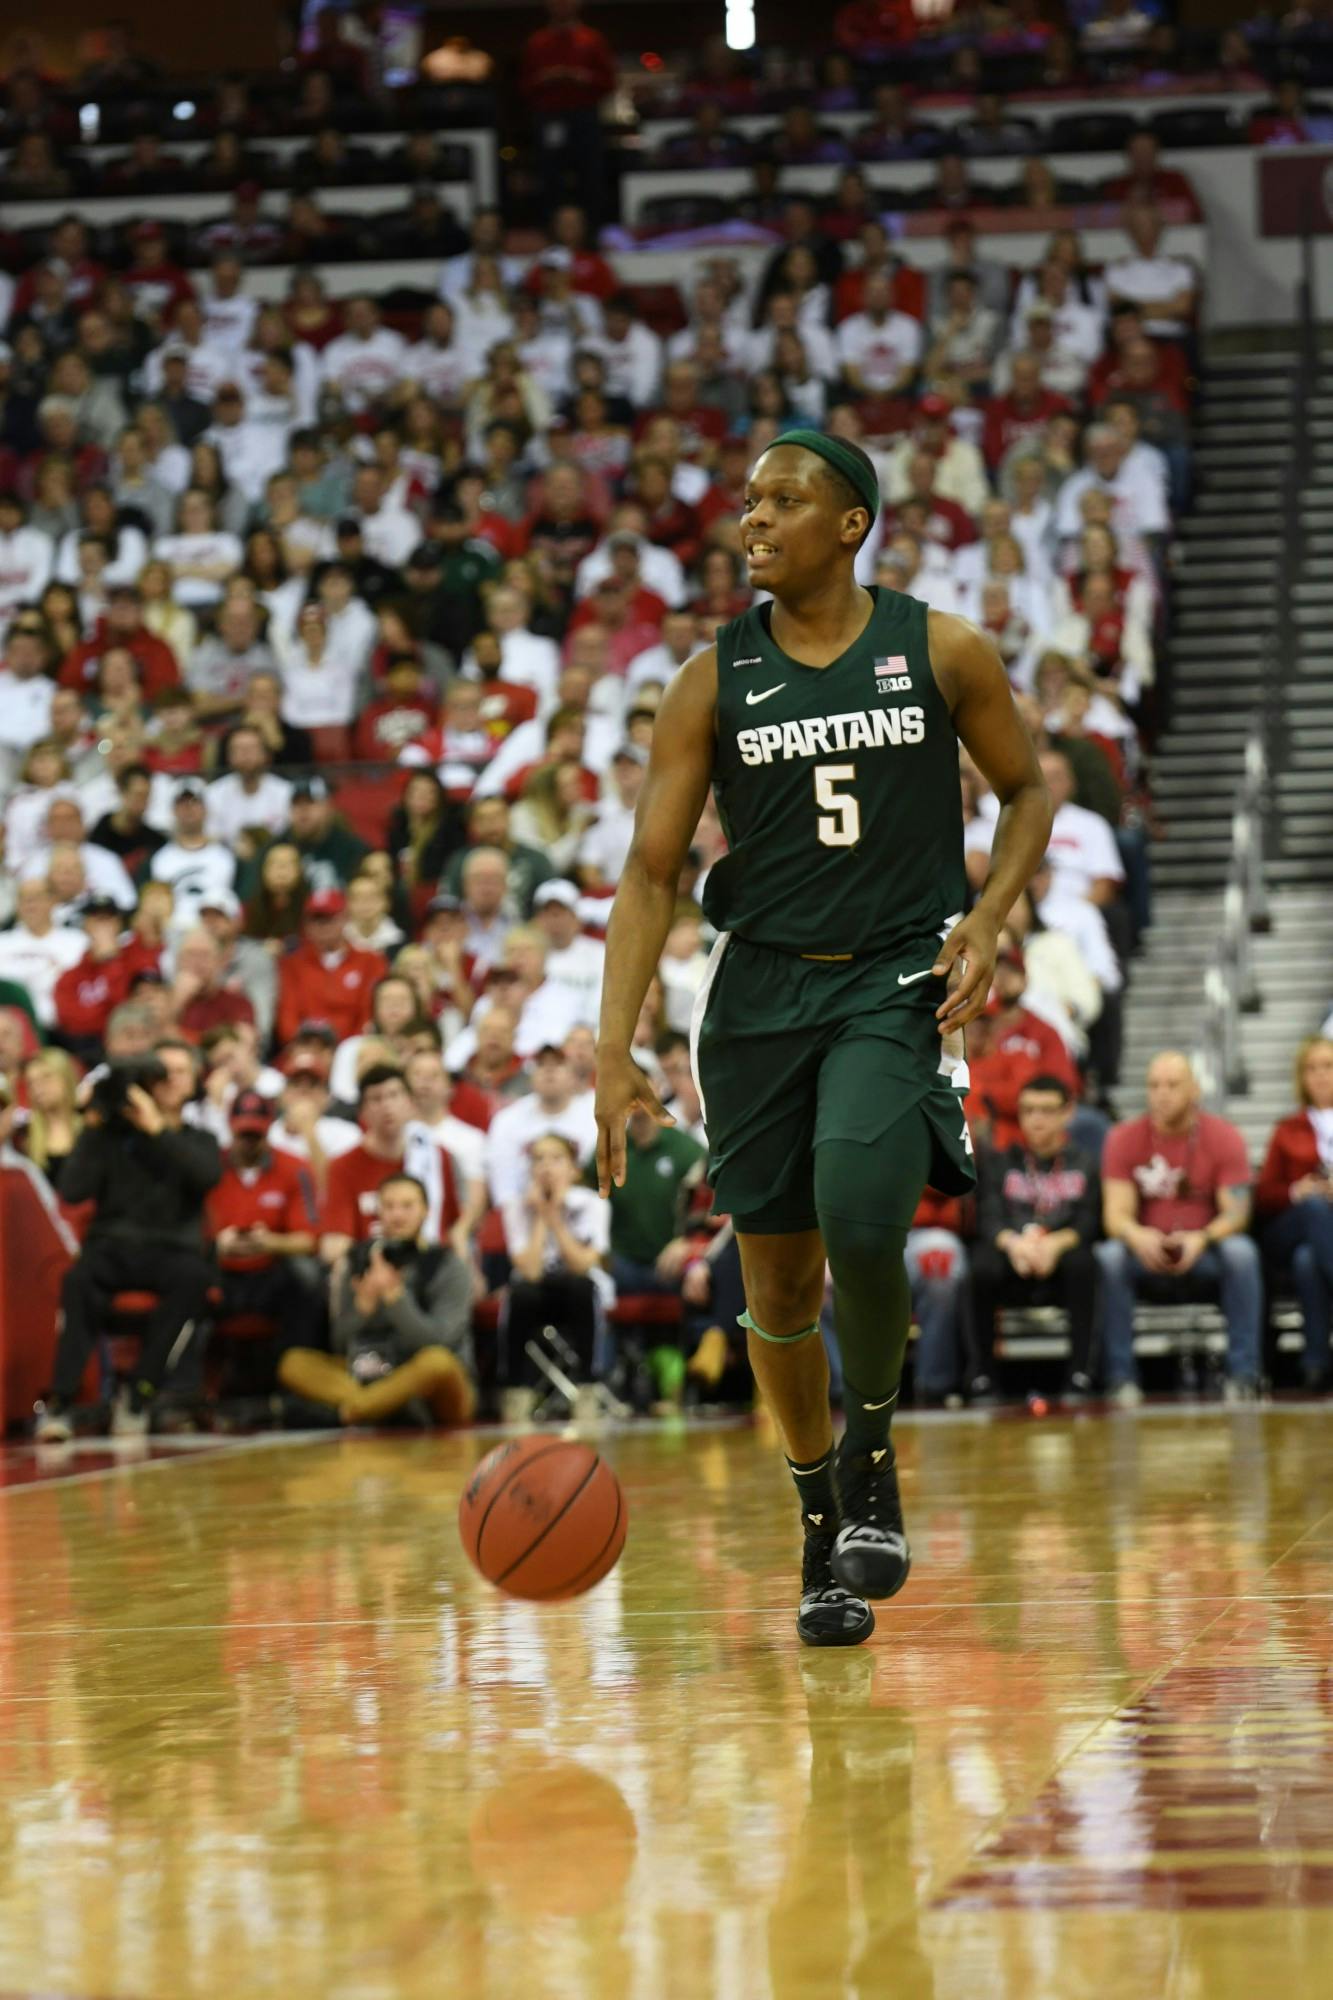 Senior guard Cassius Winston (5) dribbles down the court during the basketball game against Wisconsin at the Kohl Center in Madison, Wisconsin on February 1, 2020. The Spartans fell to the Badgers 63-64.